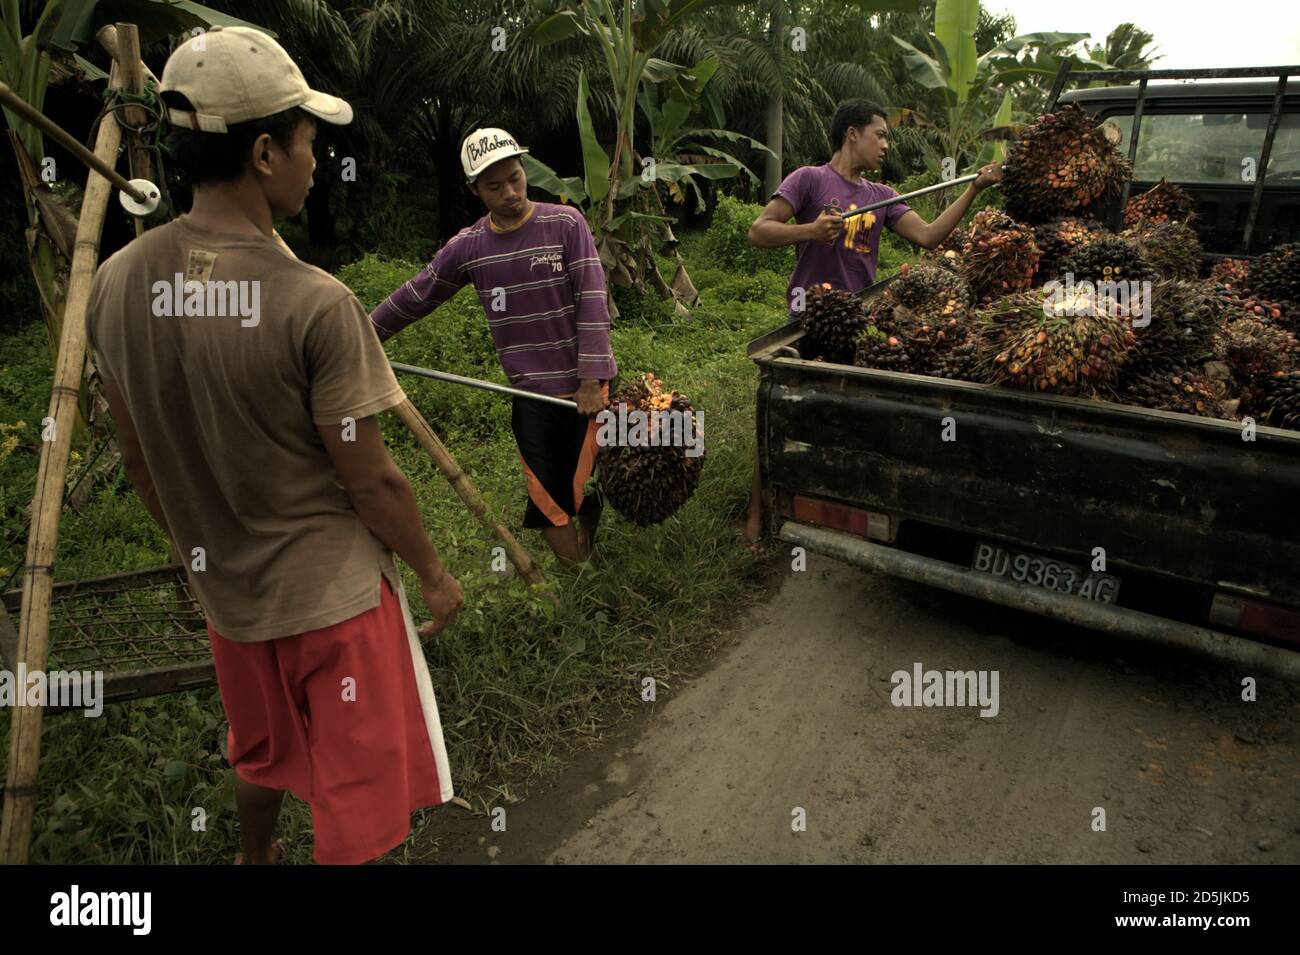 People loading freshly harvested oil palm fruits onto a pick-up truck in rural area of Bengkulu province, Sumatra, Indonesia. Stock Photo